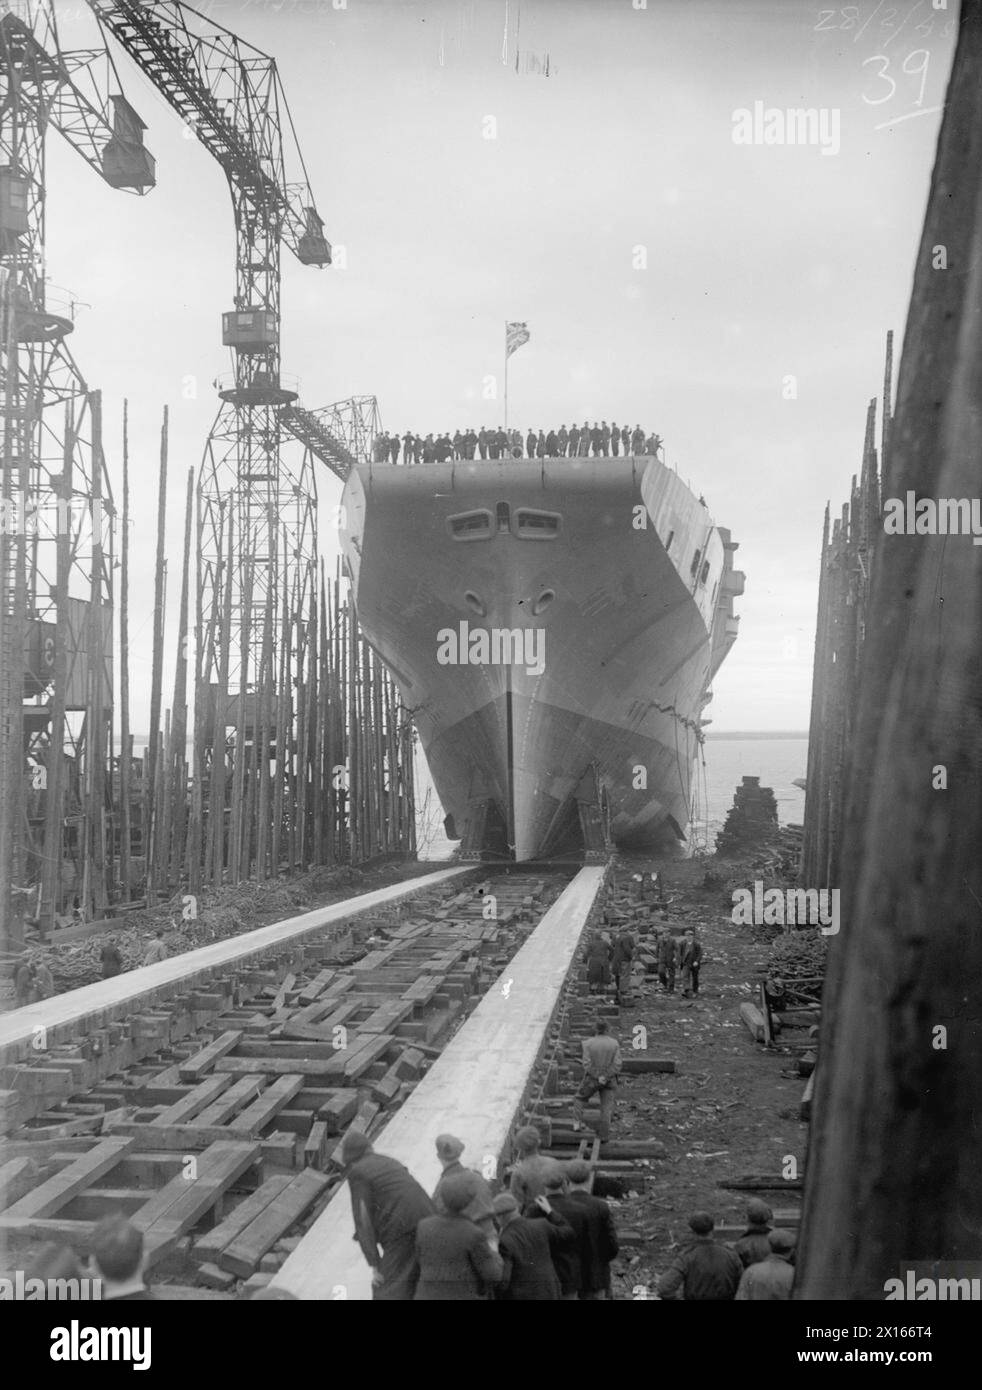 LAUNCH OF THE MAJESTIC. 28 FEBRUARY 1945, VICKERS-ARMSTRONG LTD, BARROW-IN-FURNESS. THE LAUNCH OF THE AIRCRAFT CARRIER HMS MAJESTIC BY LADY ANDERSON, WIFE OF THE RT HON SIR JOHN ANDERSON. - The MAJESTIC going down the slipway Stock Photo